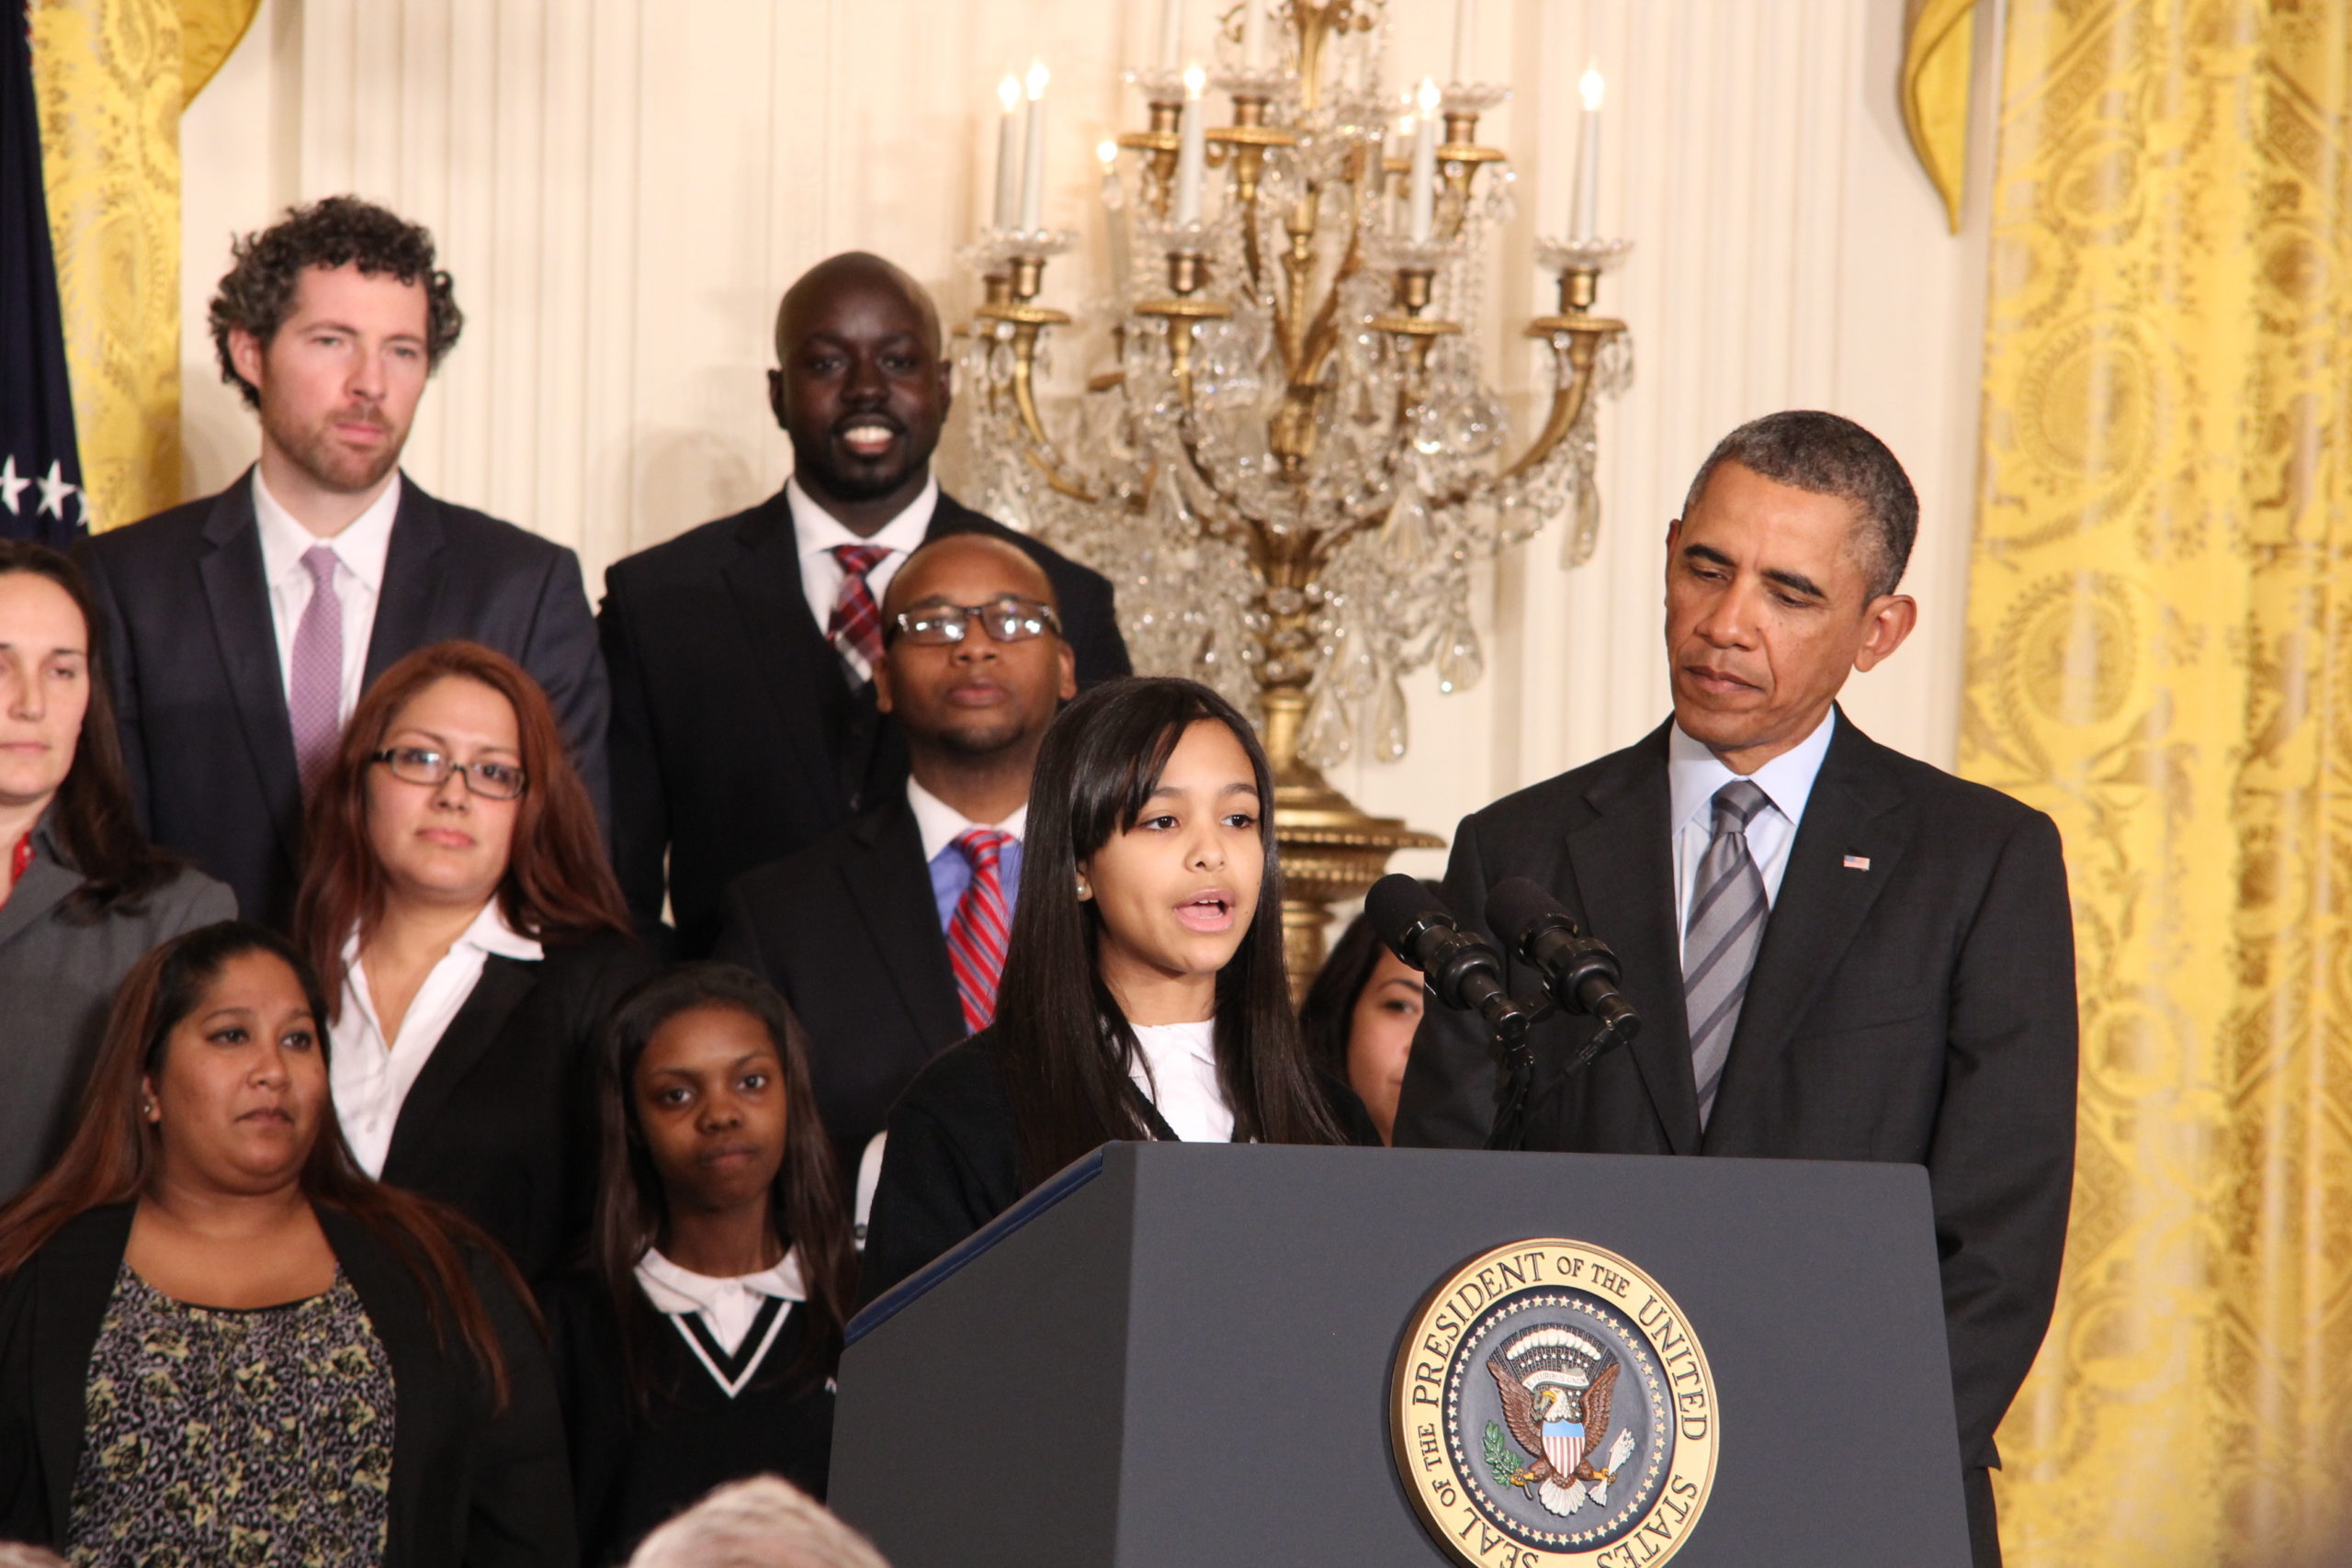 A young girl speaks at a podium at the White House. President Barack Obama, her classmates, and school leaders look on